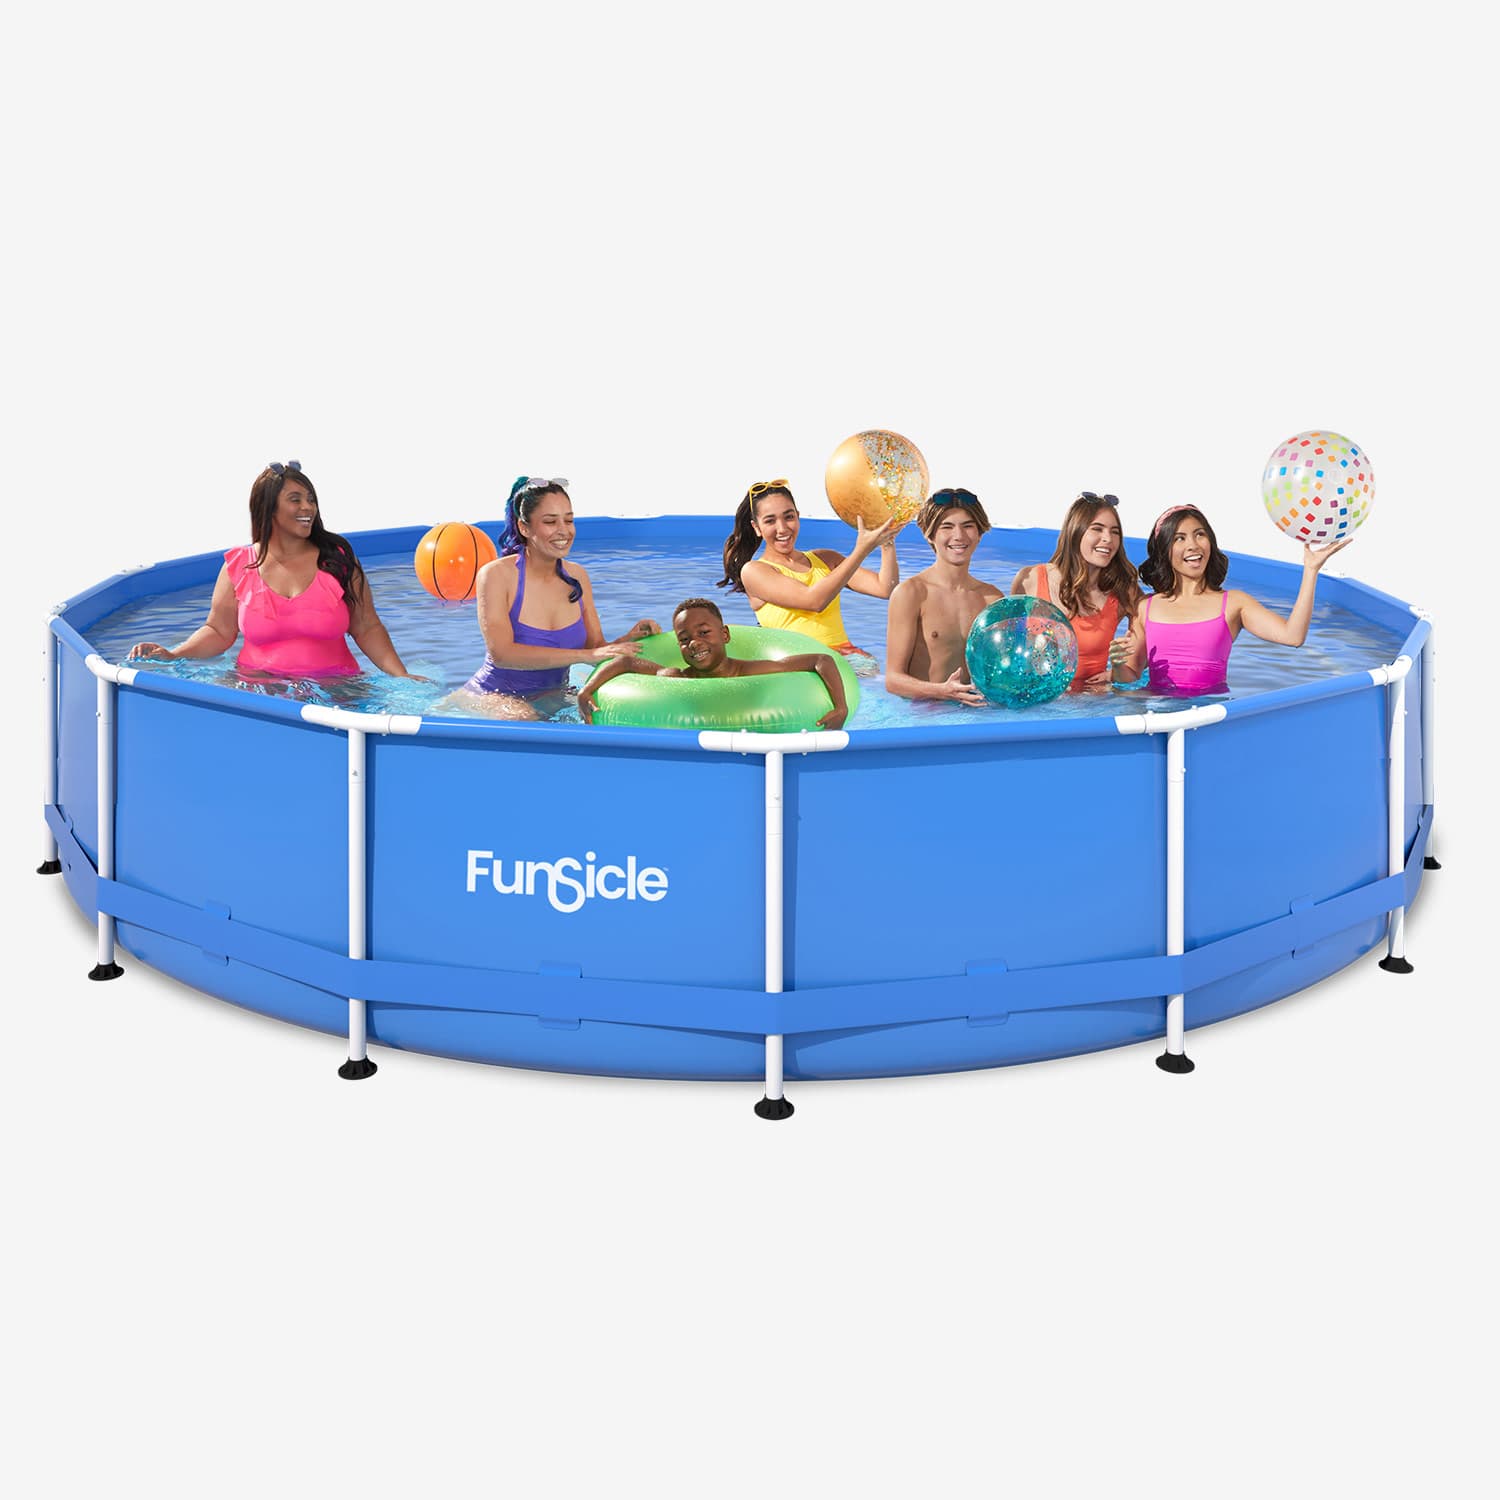 Funsicle 15 ft Activity Pool